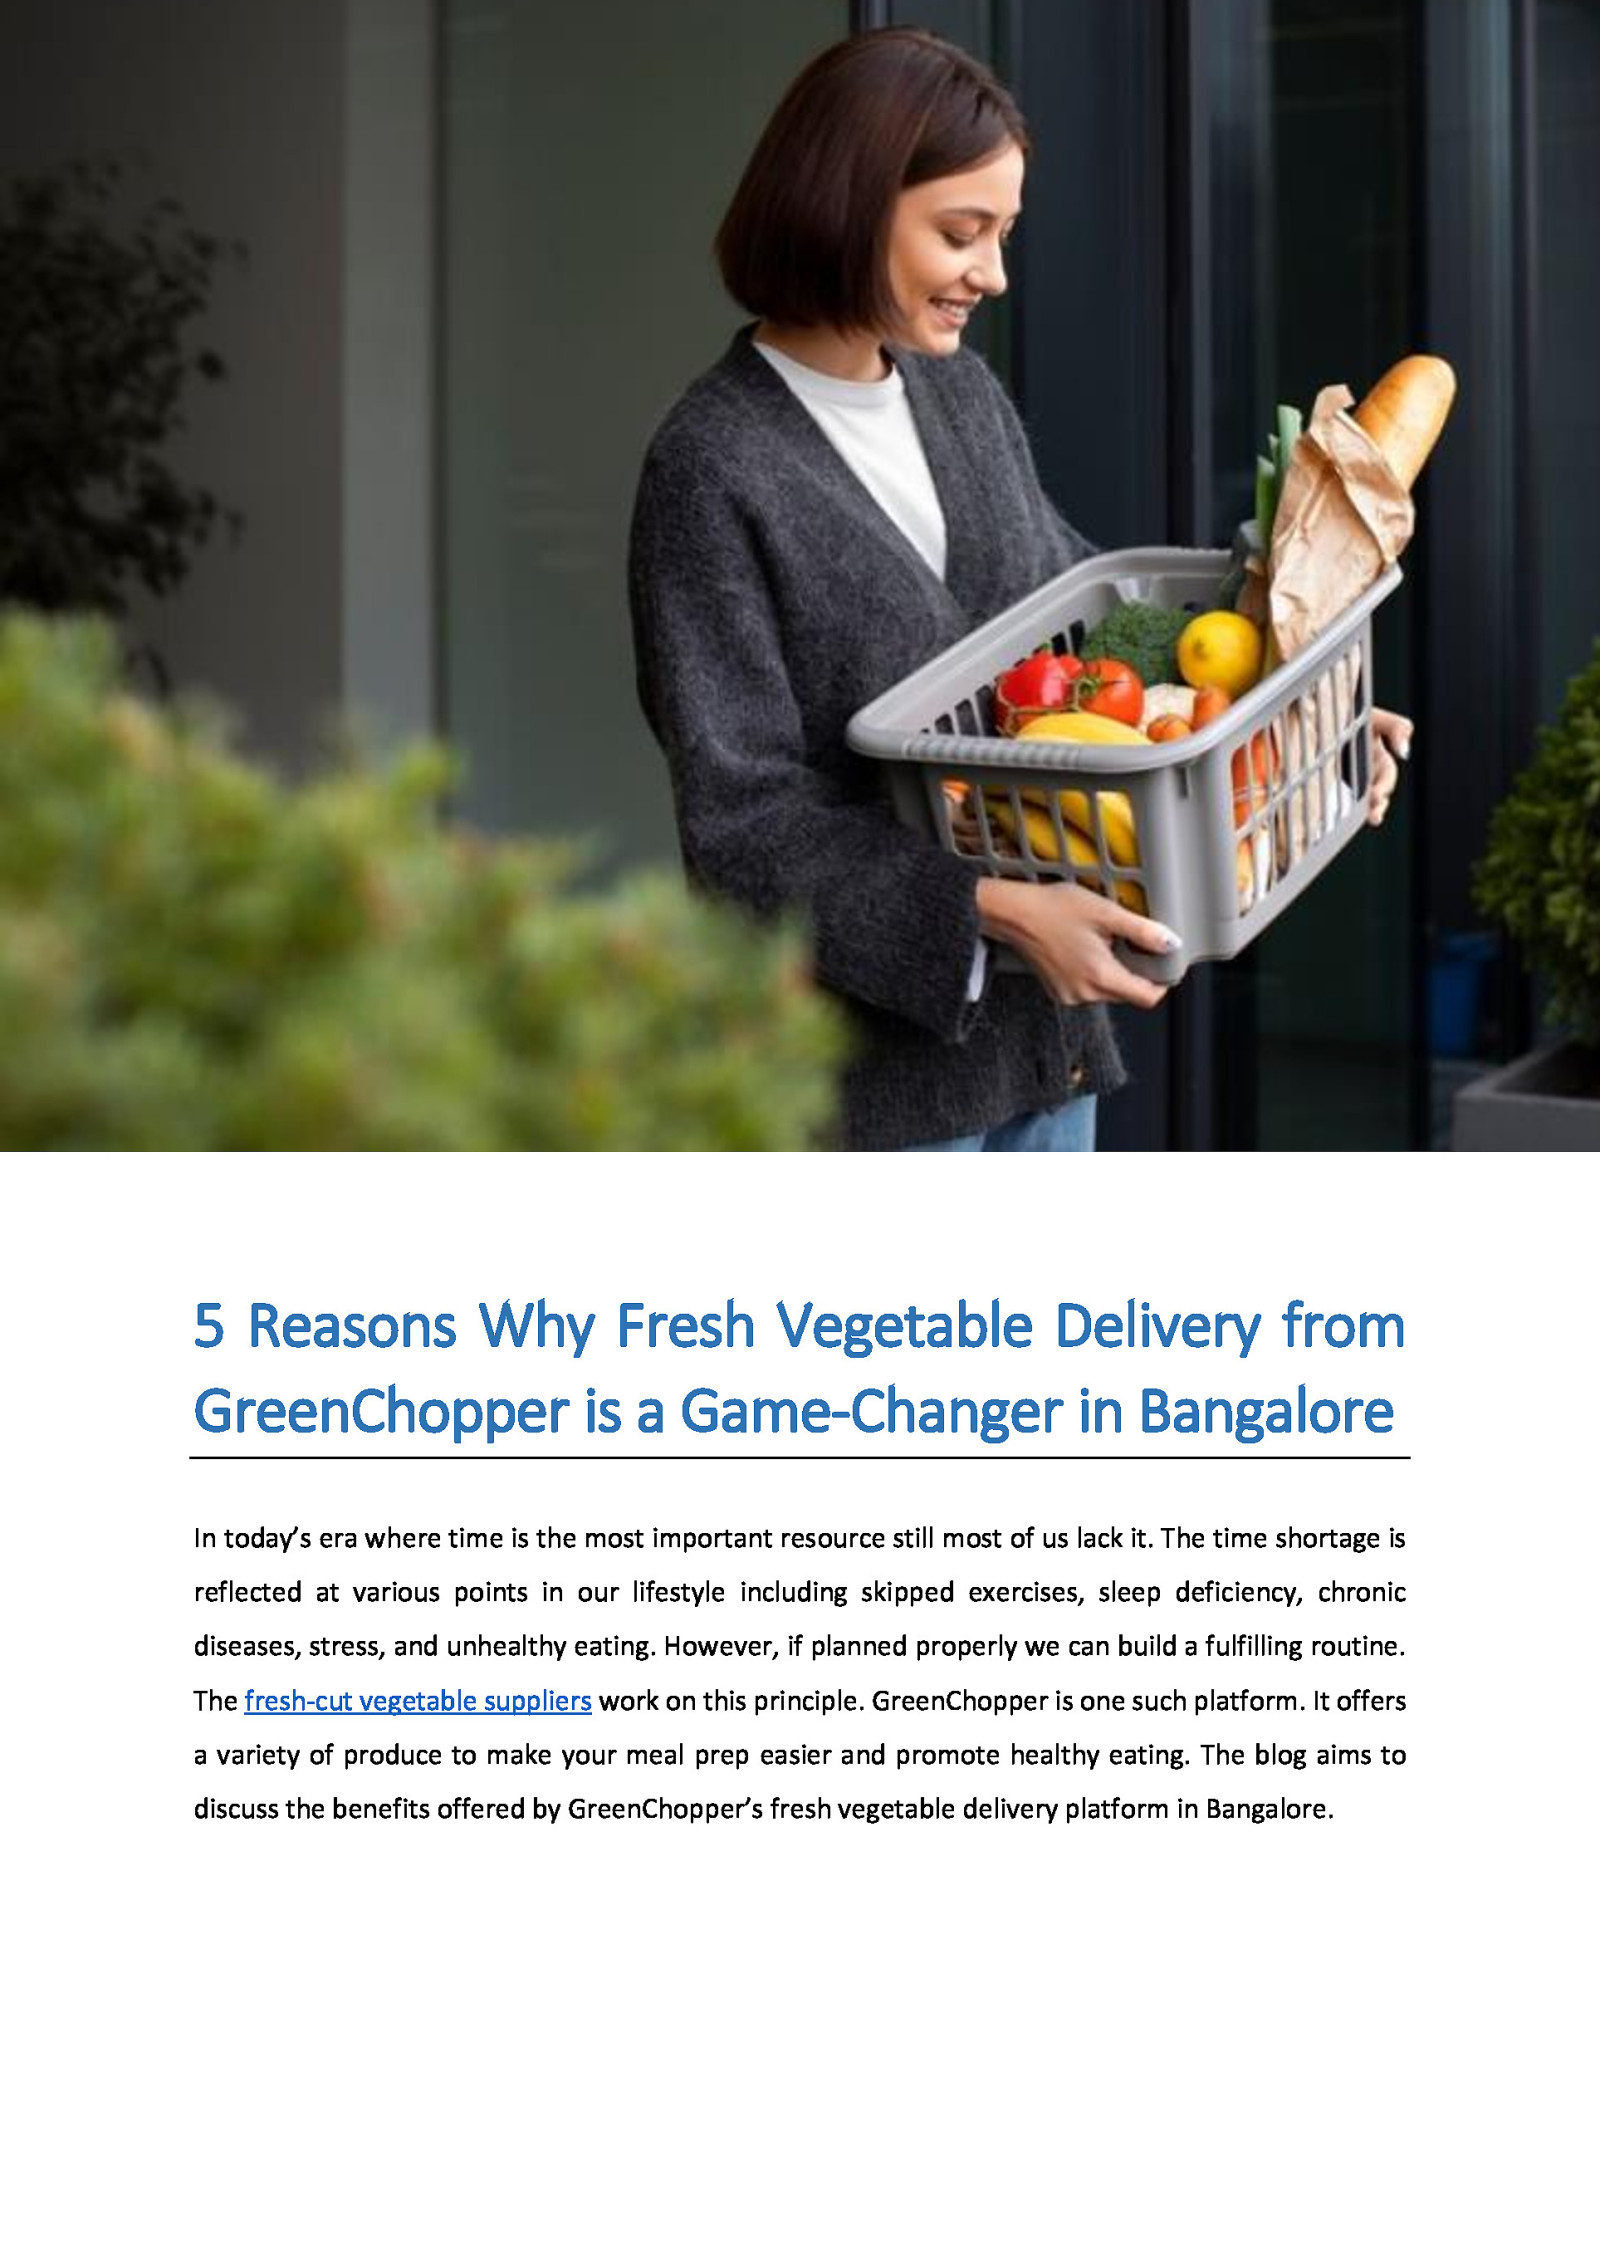 5 Reasons Why Fresh Vegetable Delivery from GreenChopper is a Game-Changer in Bangalore